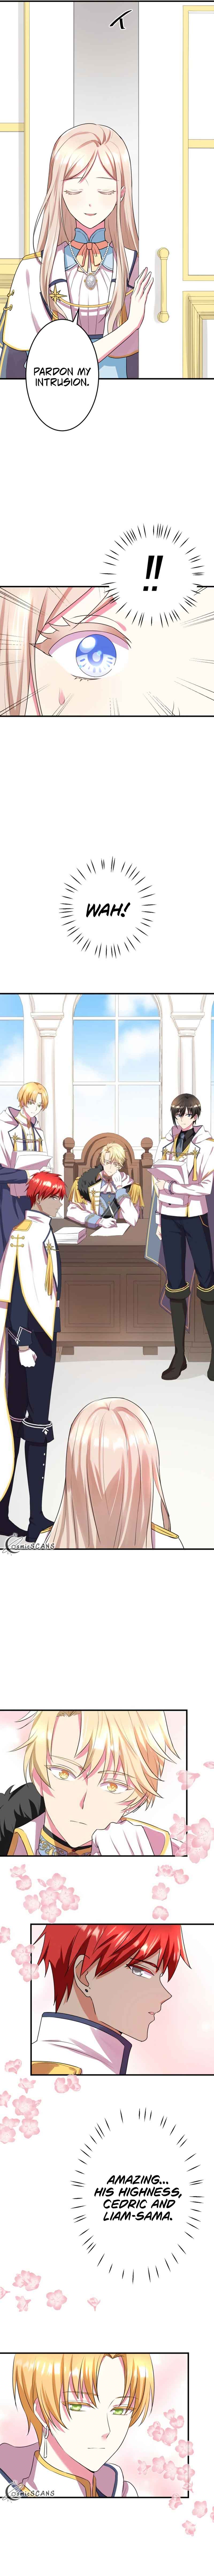 Even though I become a side character, I’m being adored by an overprotective duke chapter 27